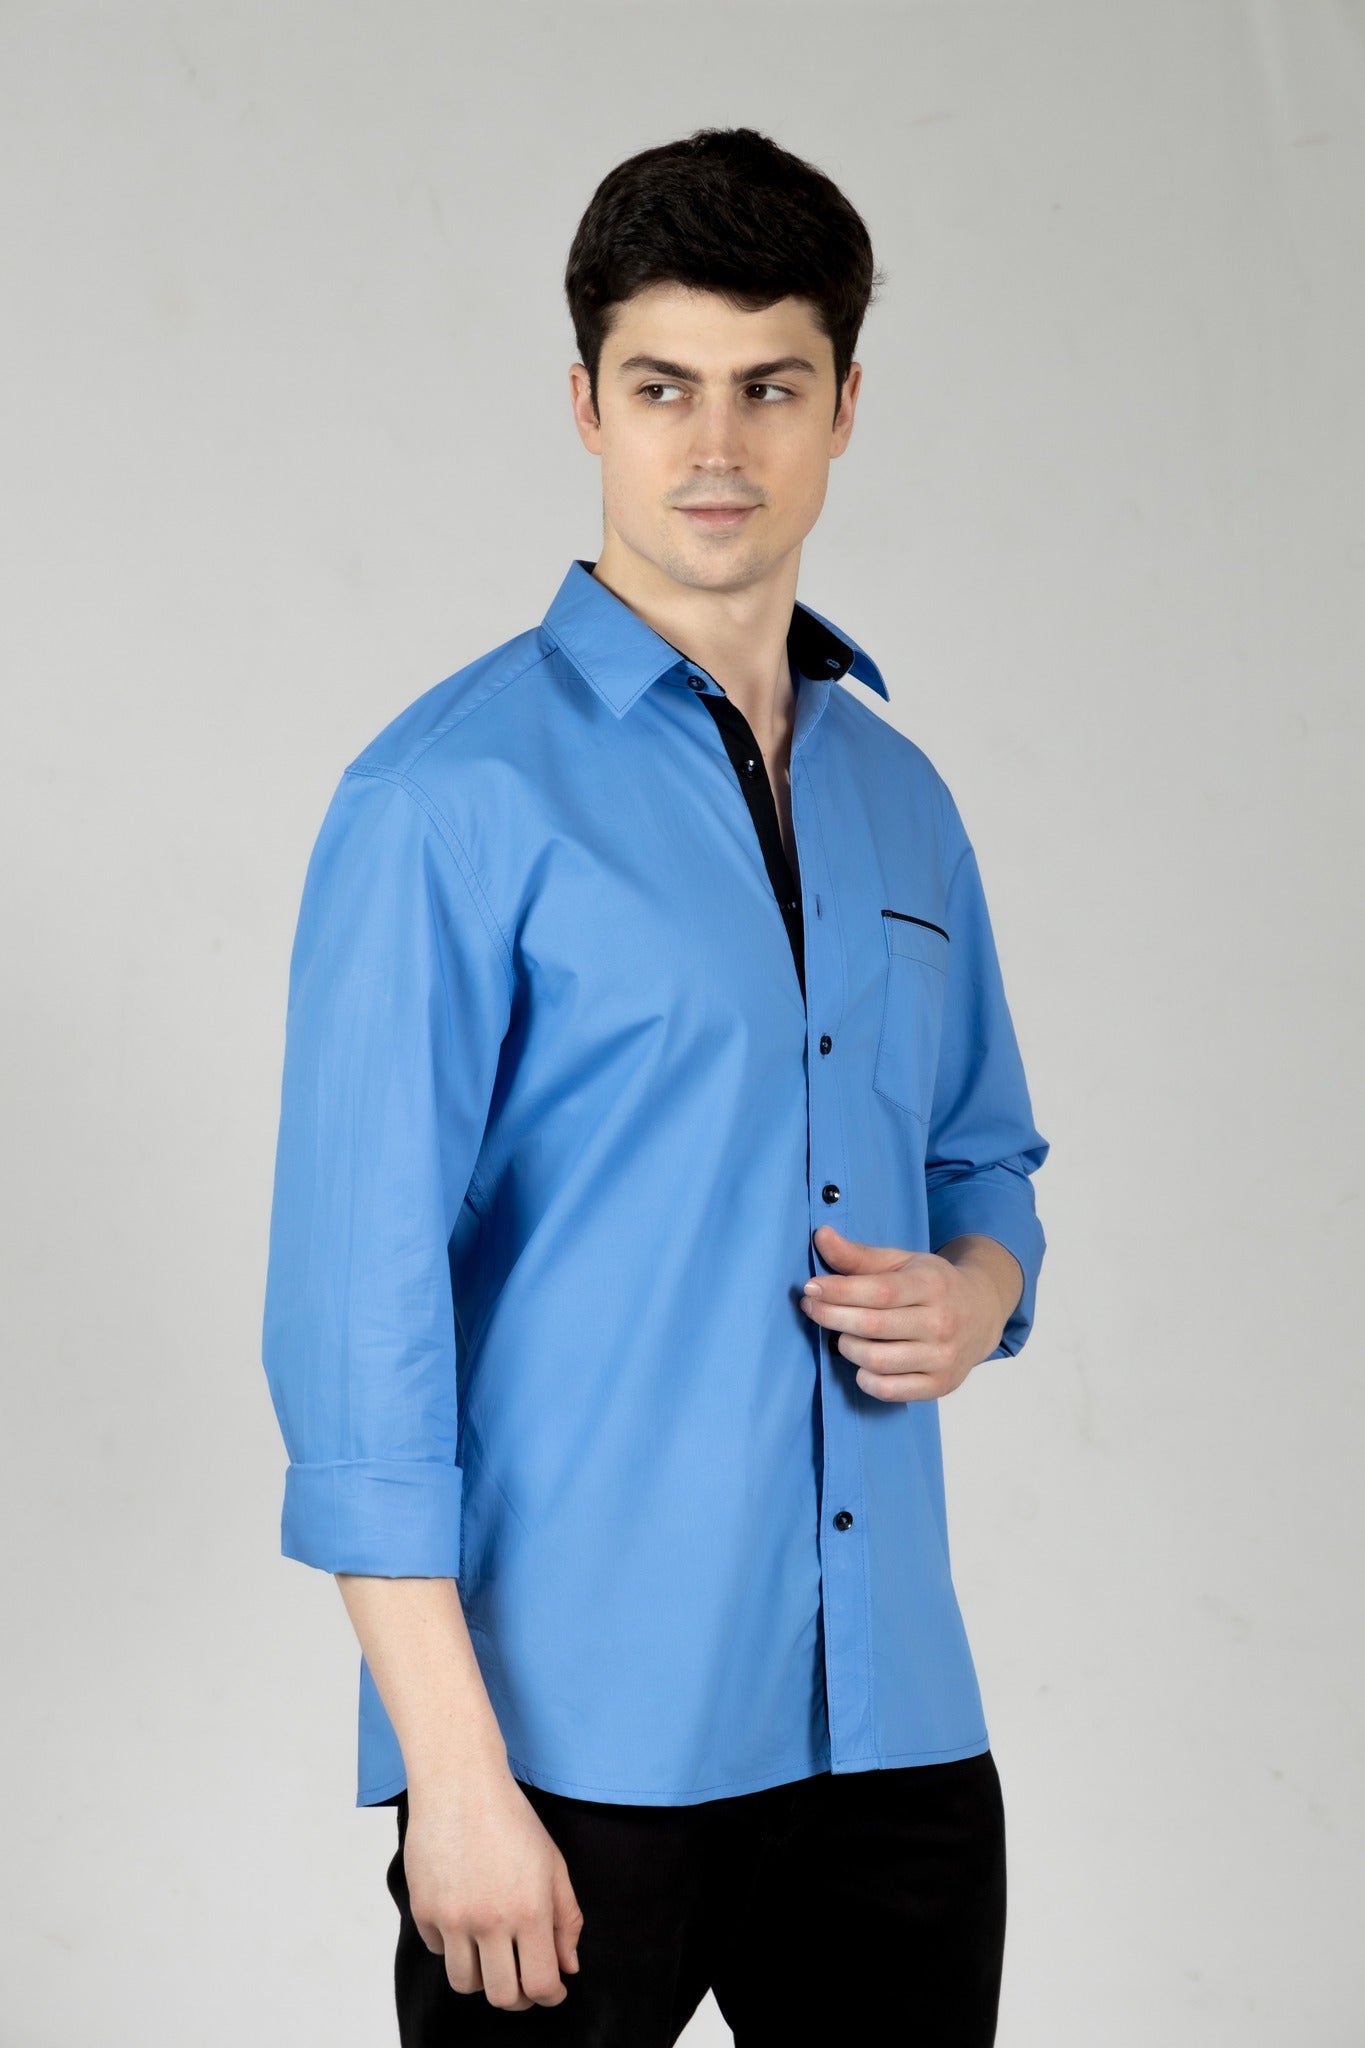 Electric Blue Contrast Men Shirt in Cotton with Full Sleeves & Single Pocket - OZMOD